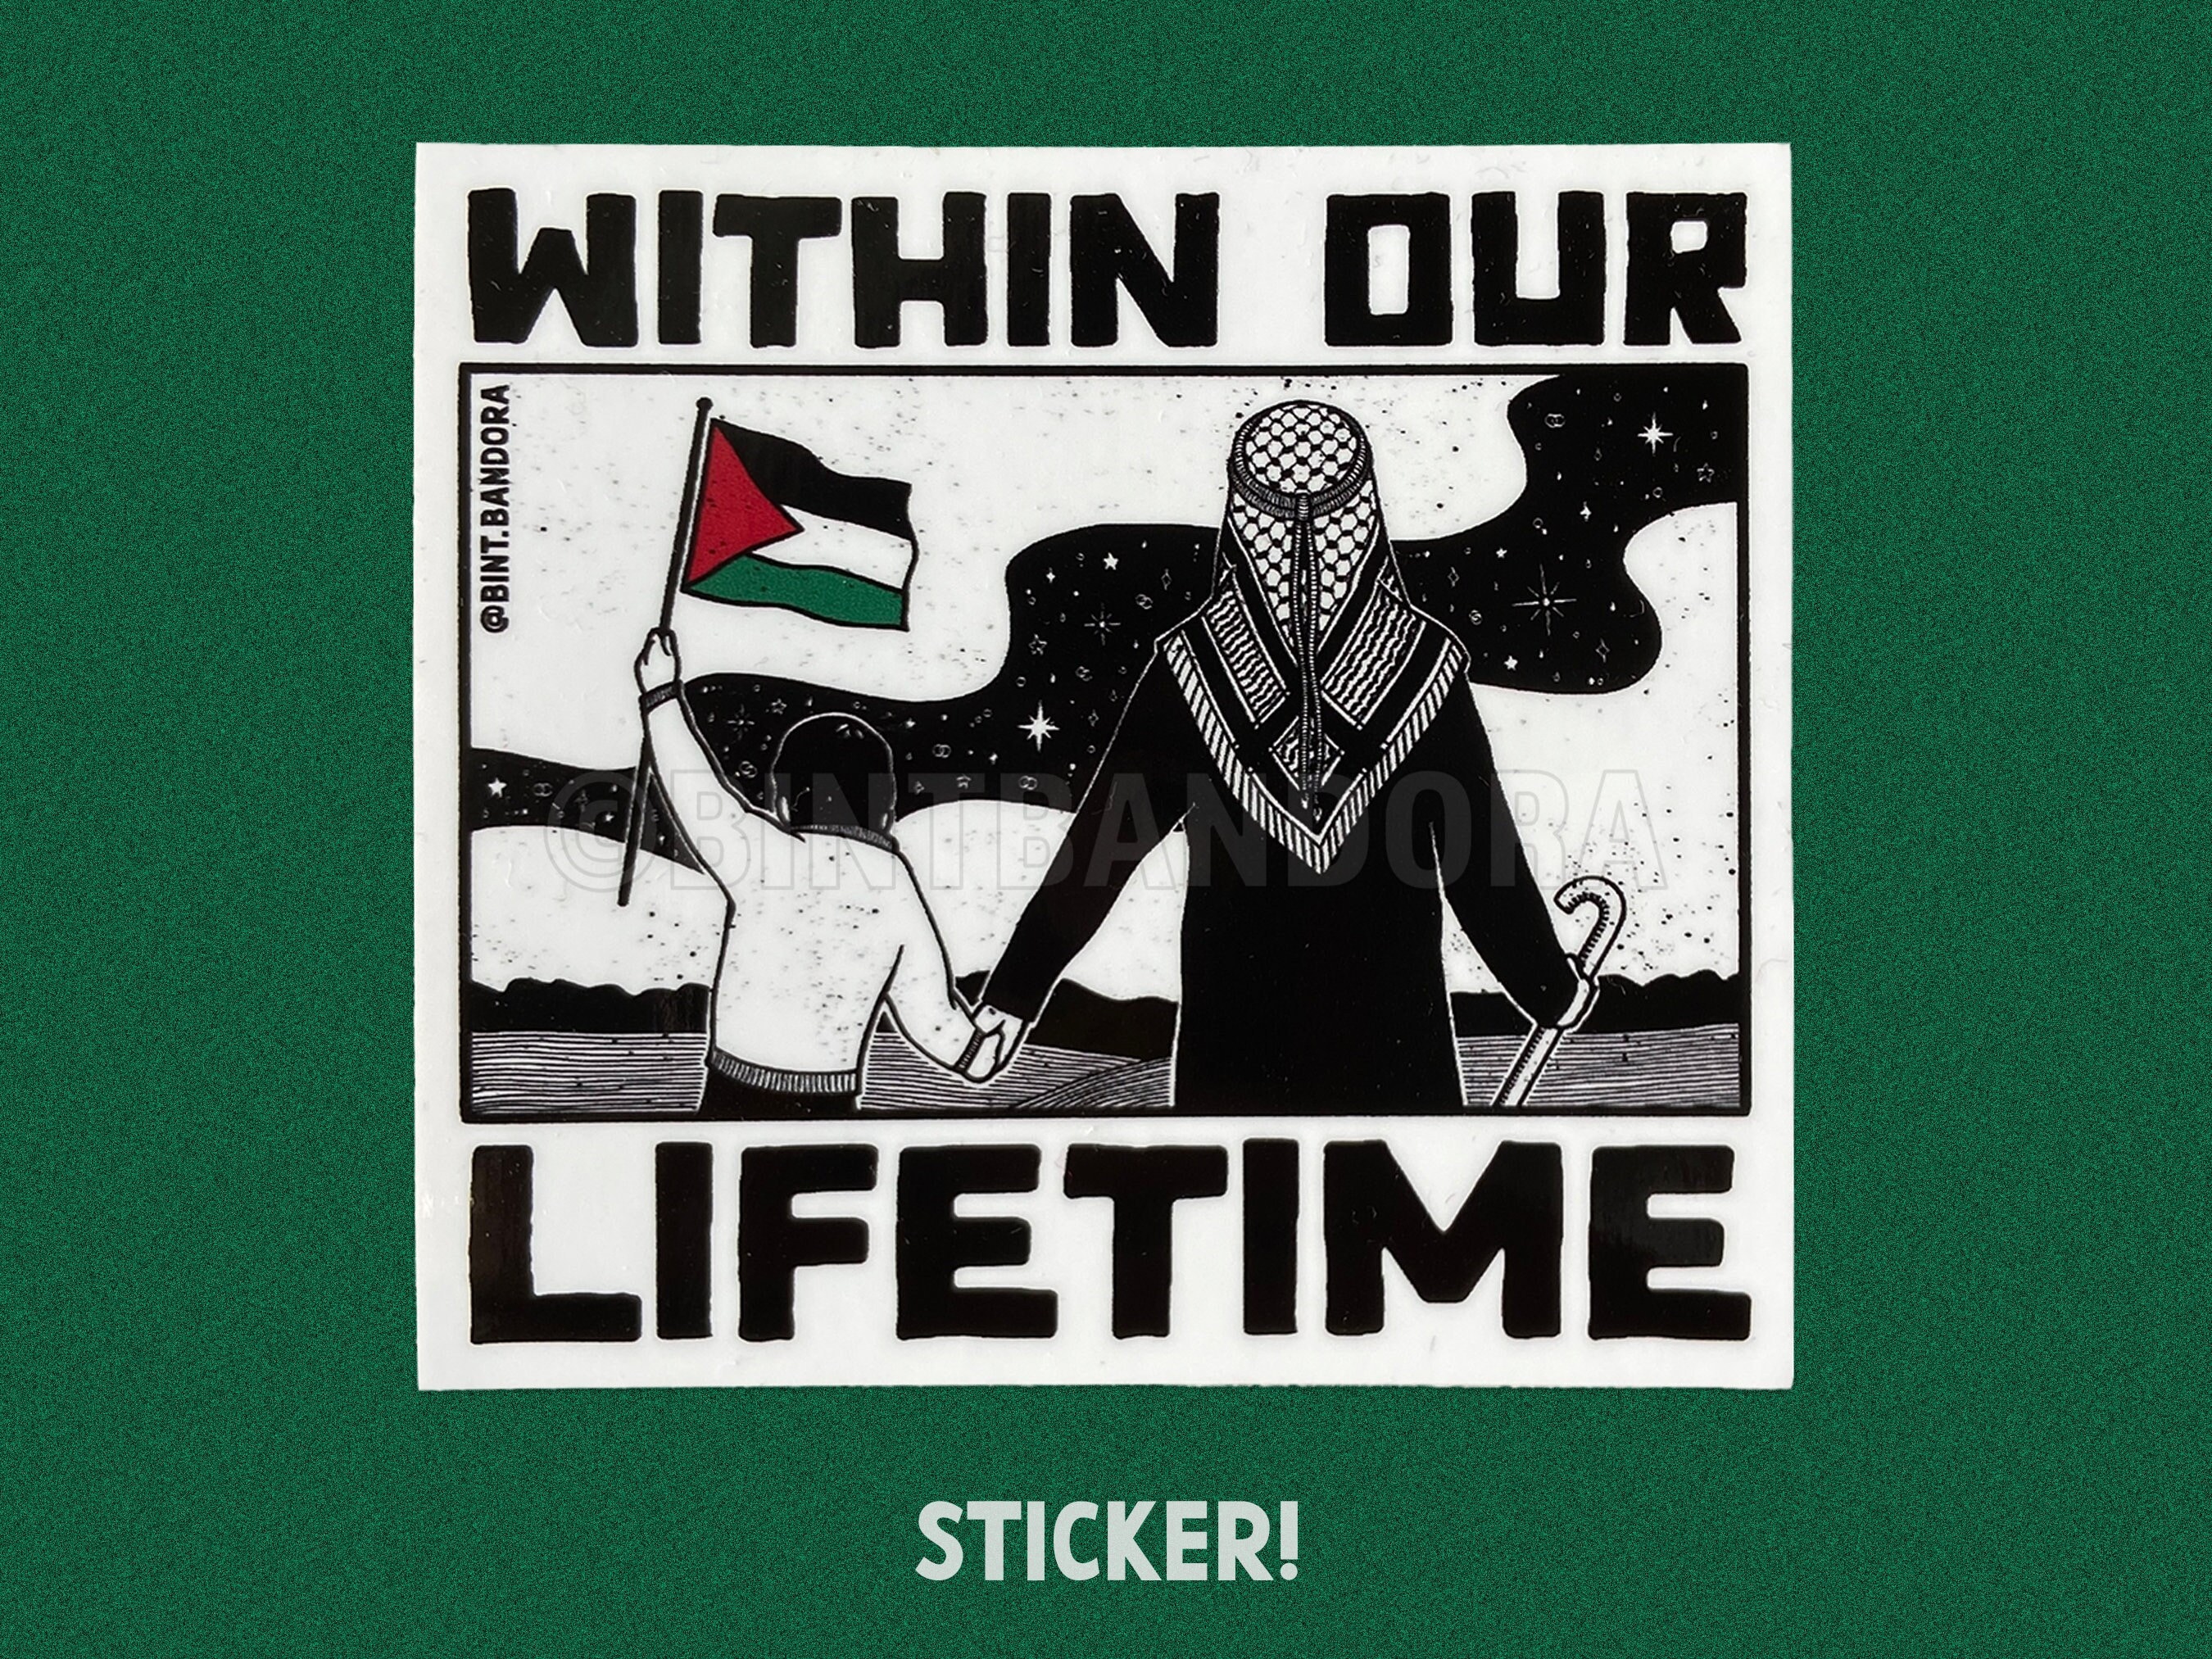 Palestine sticker pack Sticker for Sale by Mo5tar